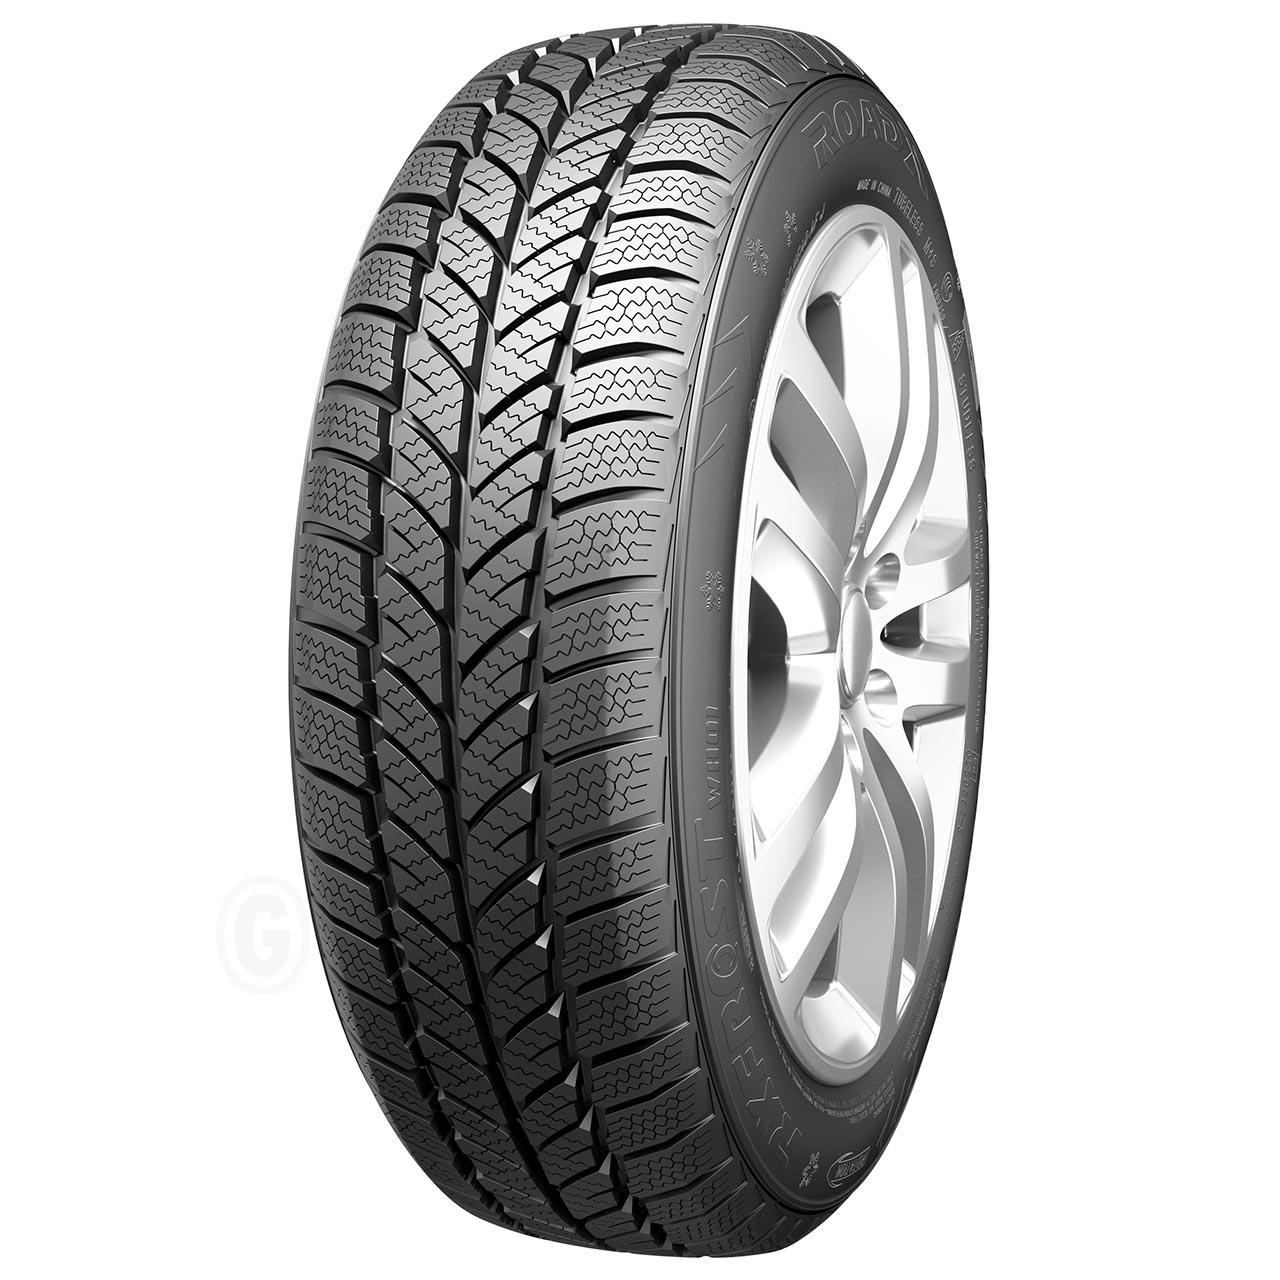 ROADX RX FROST WH01 175/65R15 88H BSW XL